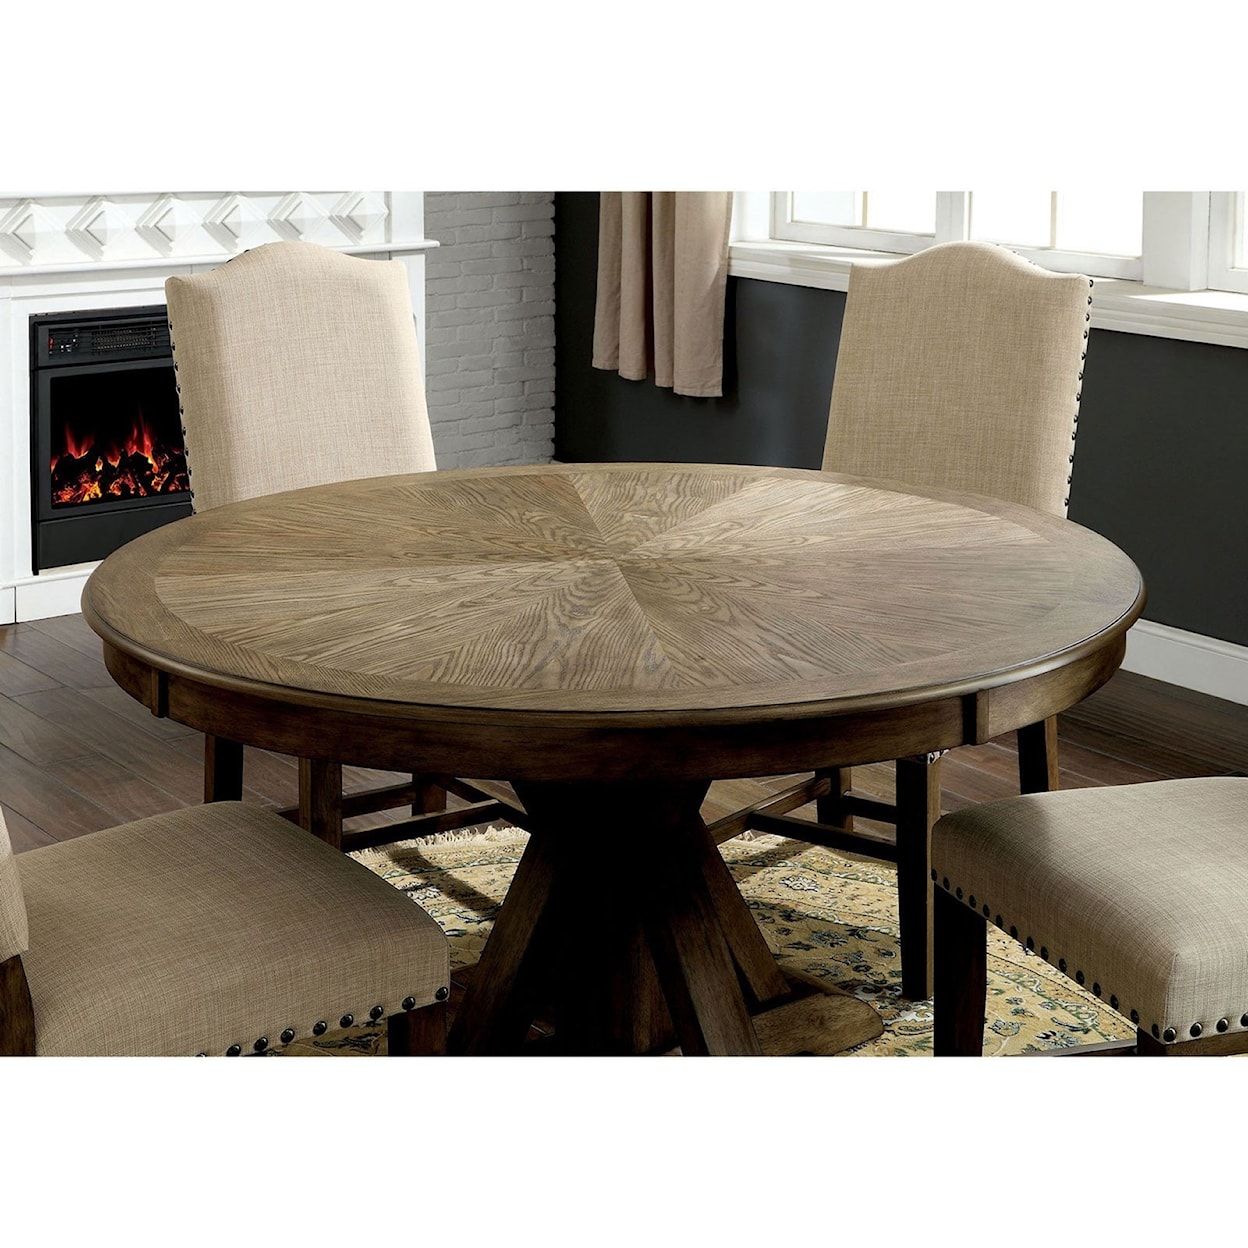 Furniture of America Julia Round Table + 4 Side Chairs